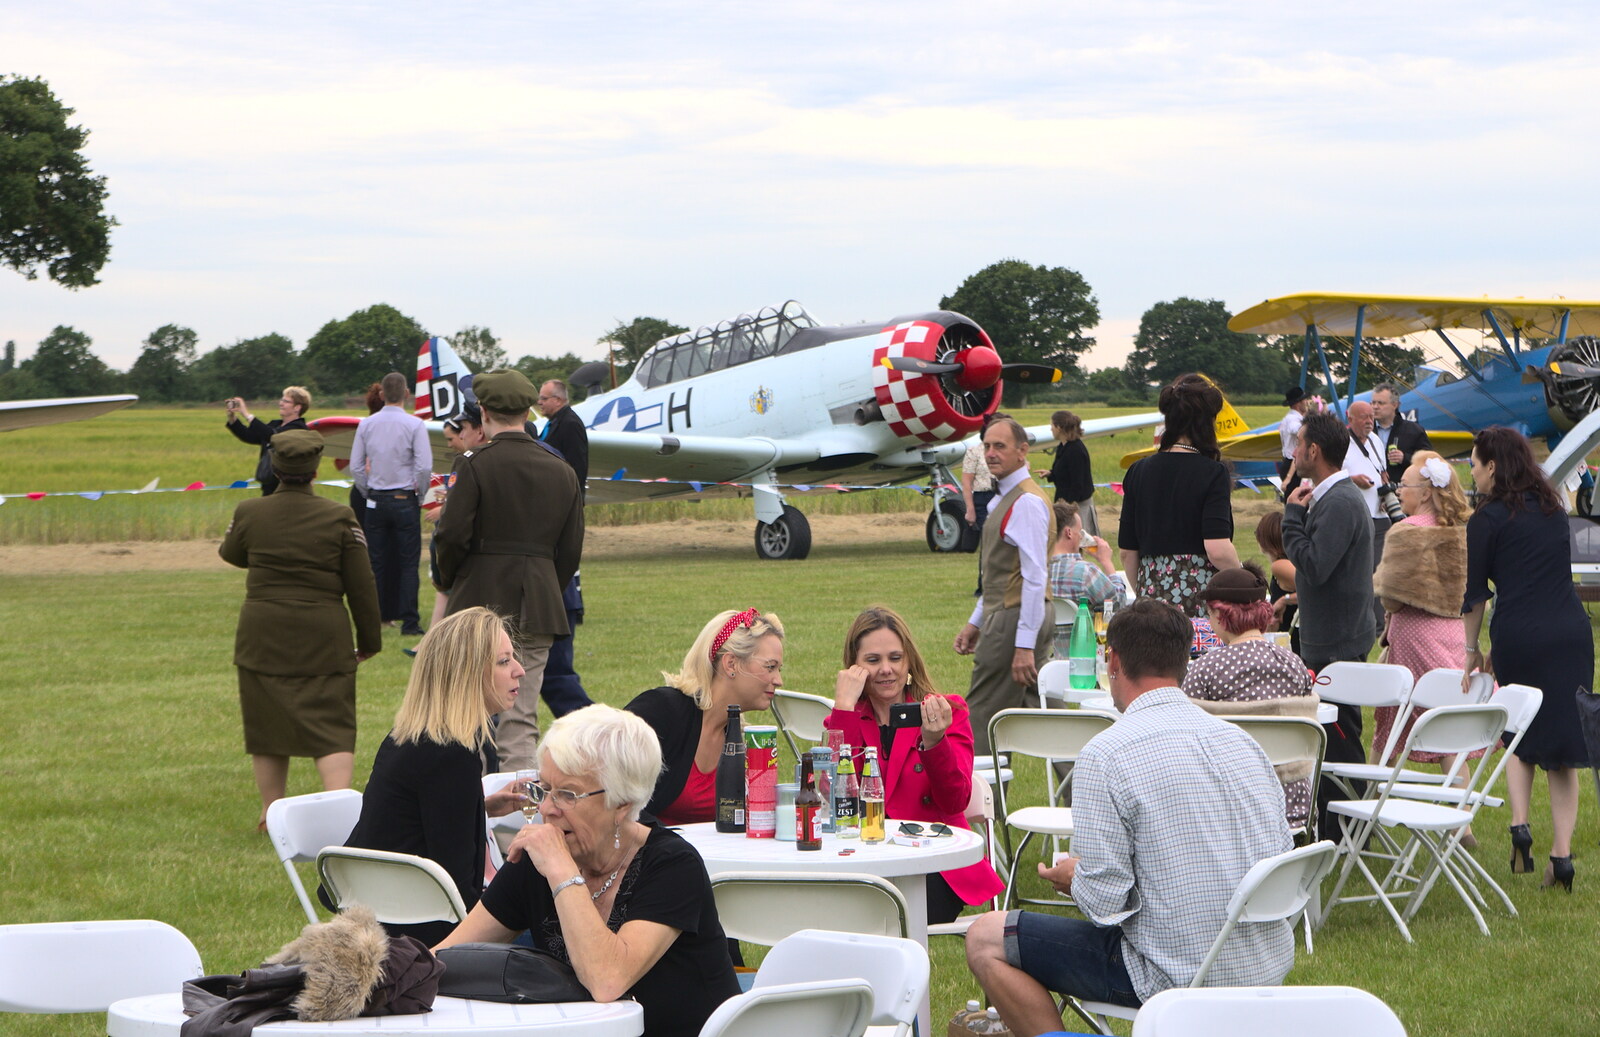 Guests assemble for picnics near the Harvard from "Our Little Friends" Warbirds Hangar Dance, Hardwick, Norfolk - 9th July 2016